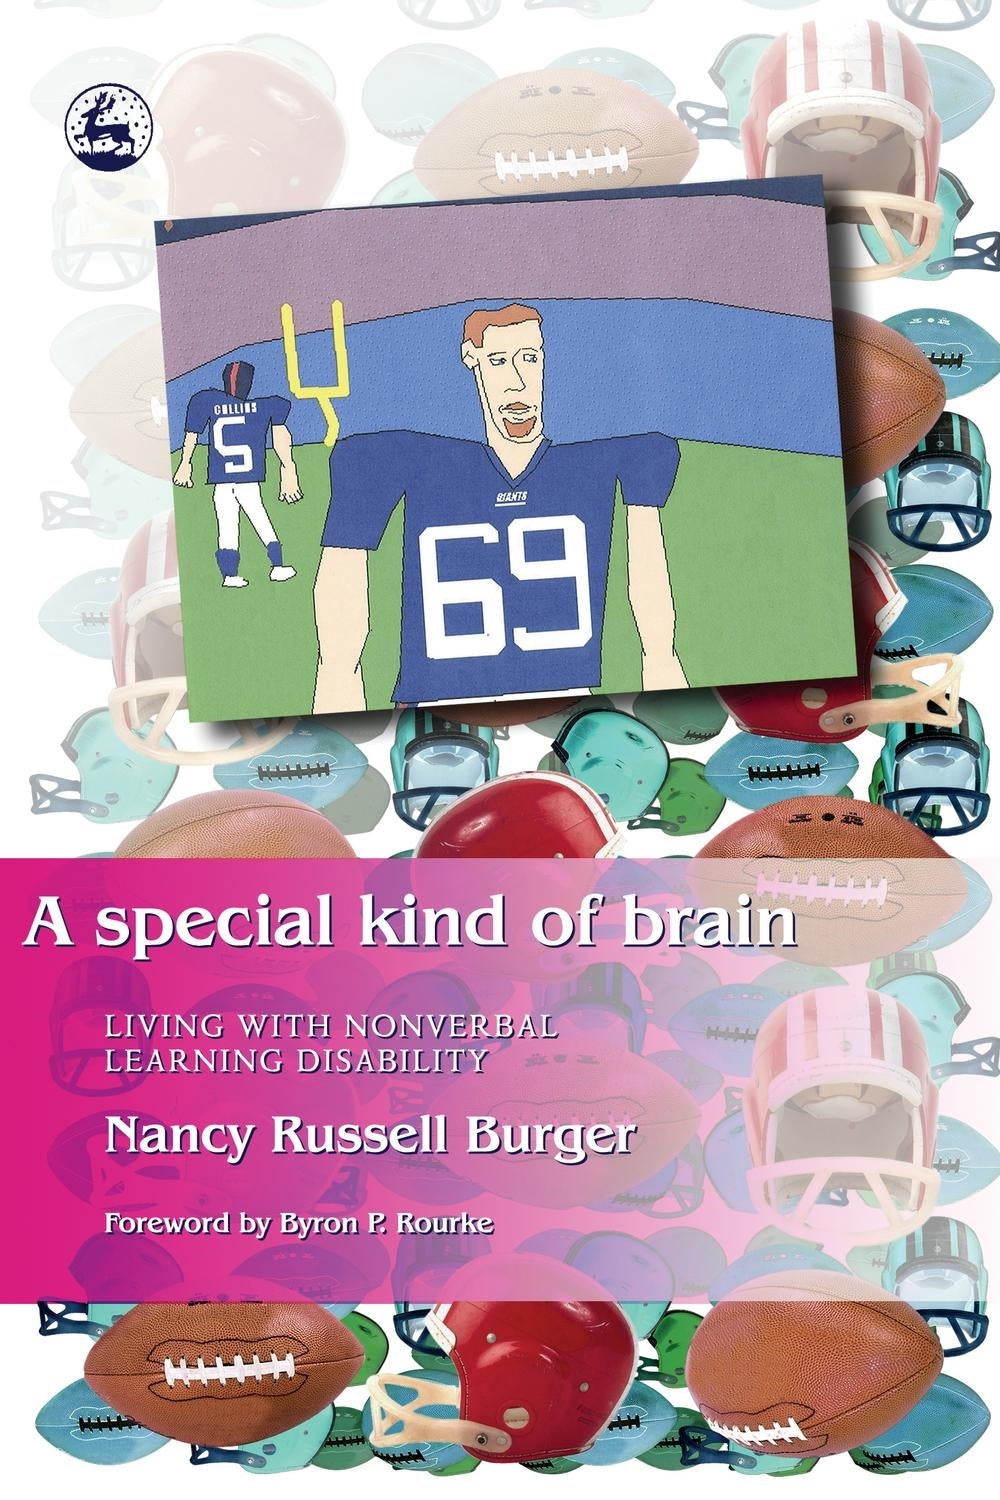 A Special Kind of Brain by Nancy Burger